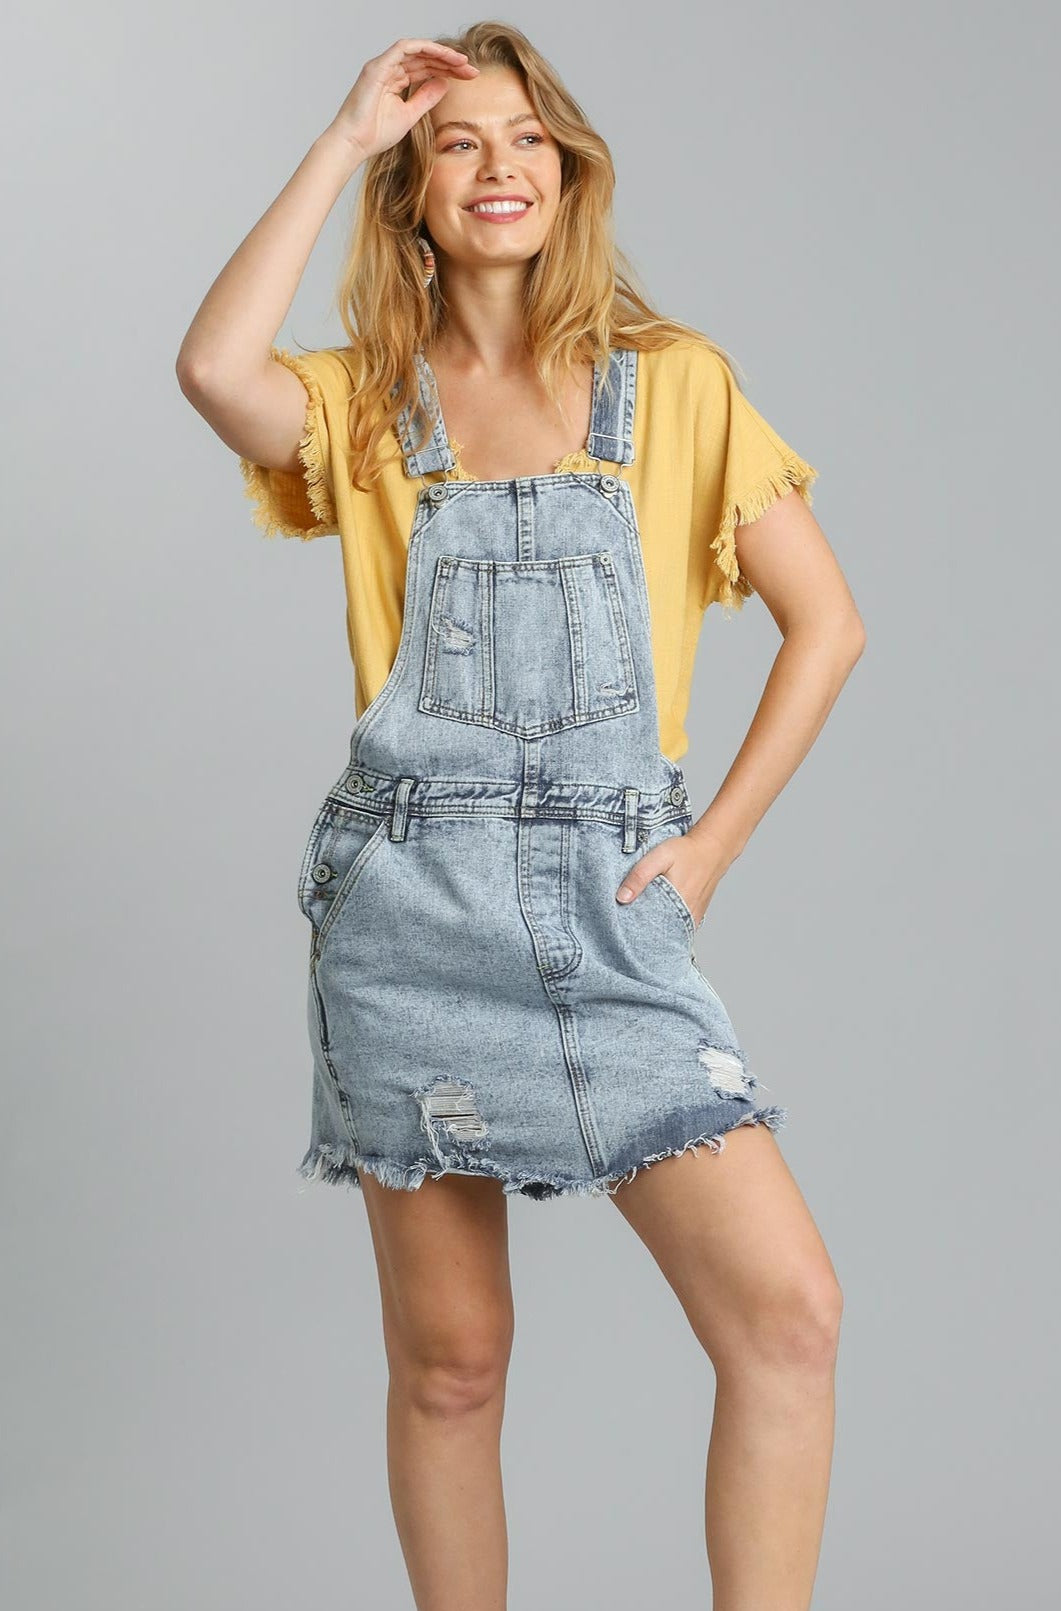 Over And Out Overall Dress - Lt Denim